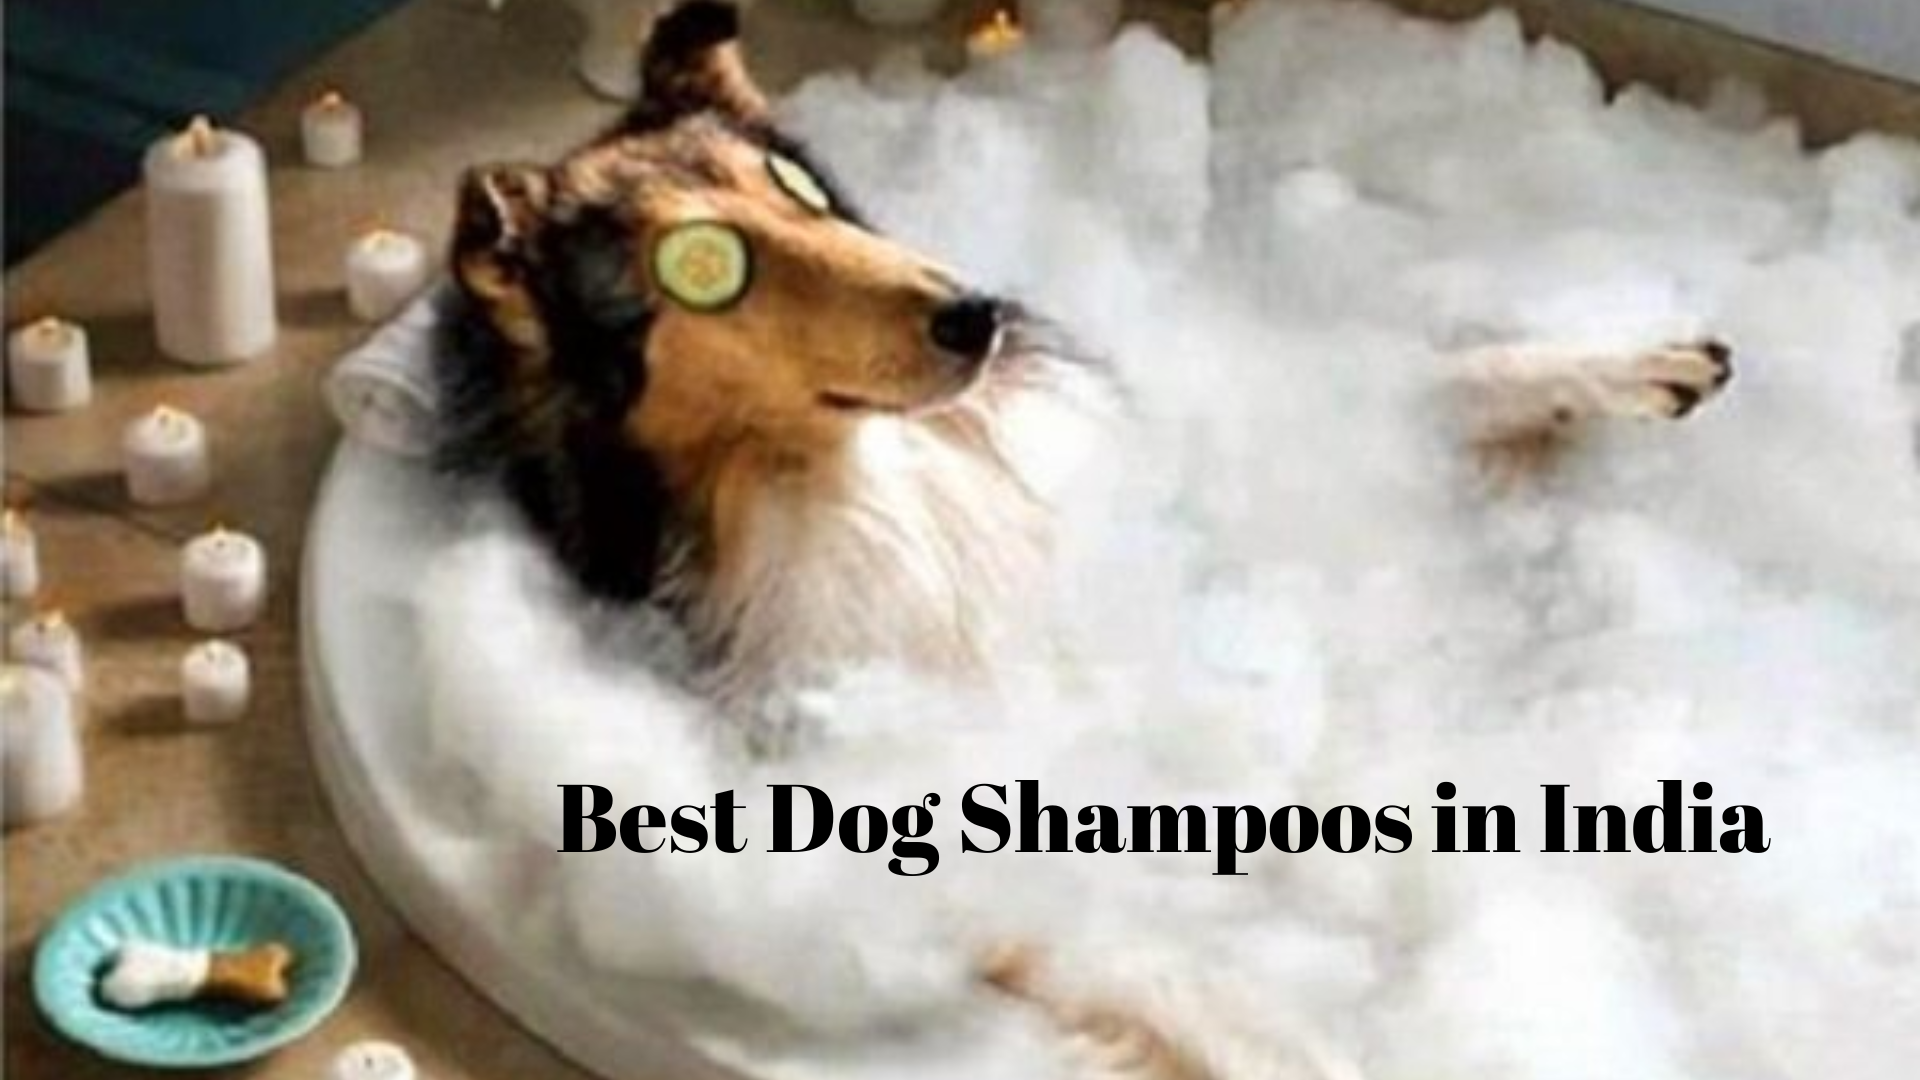 12 best dog shampoos in India